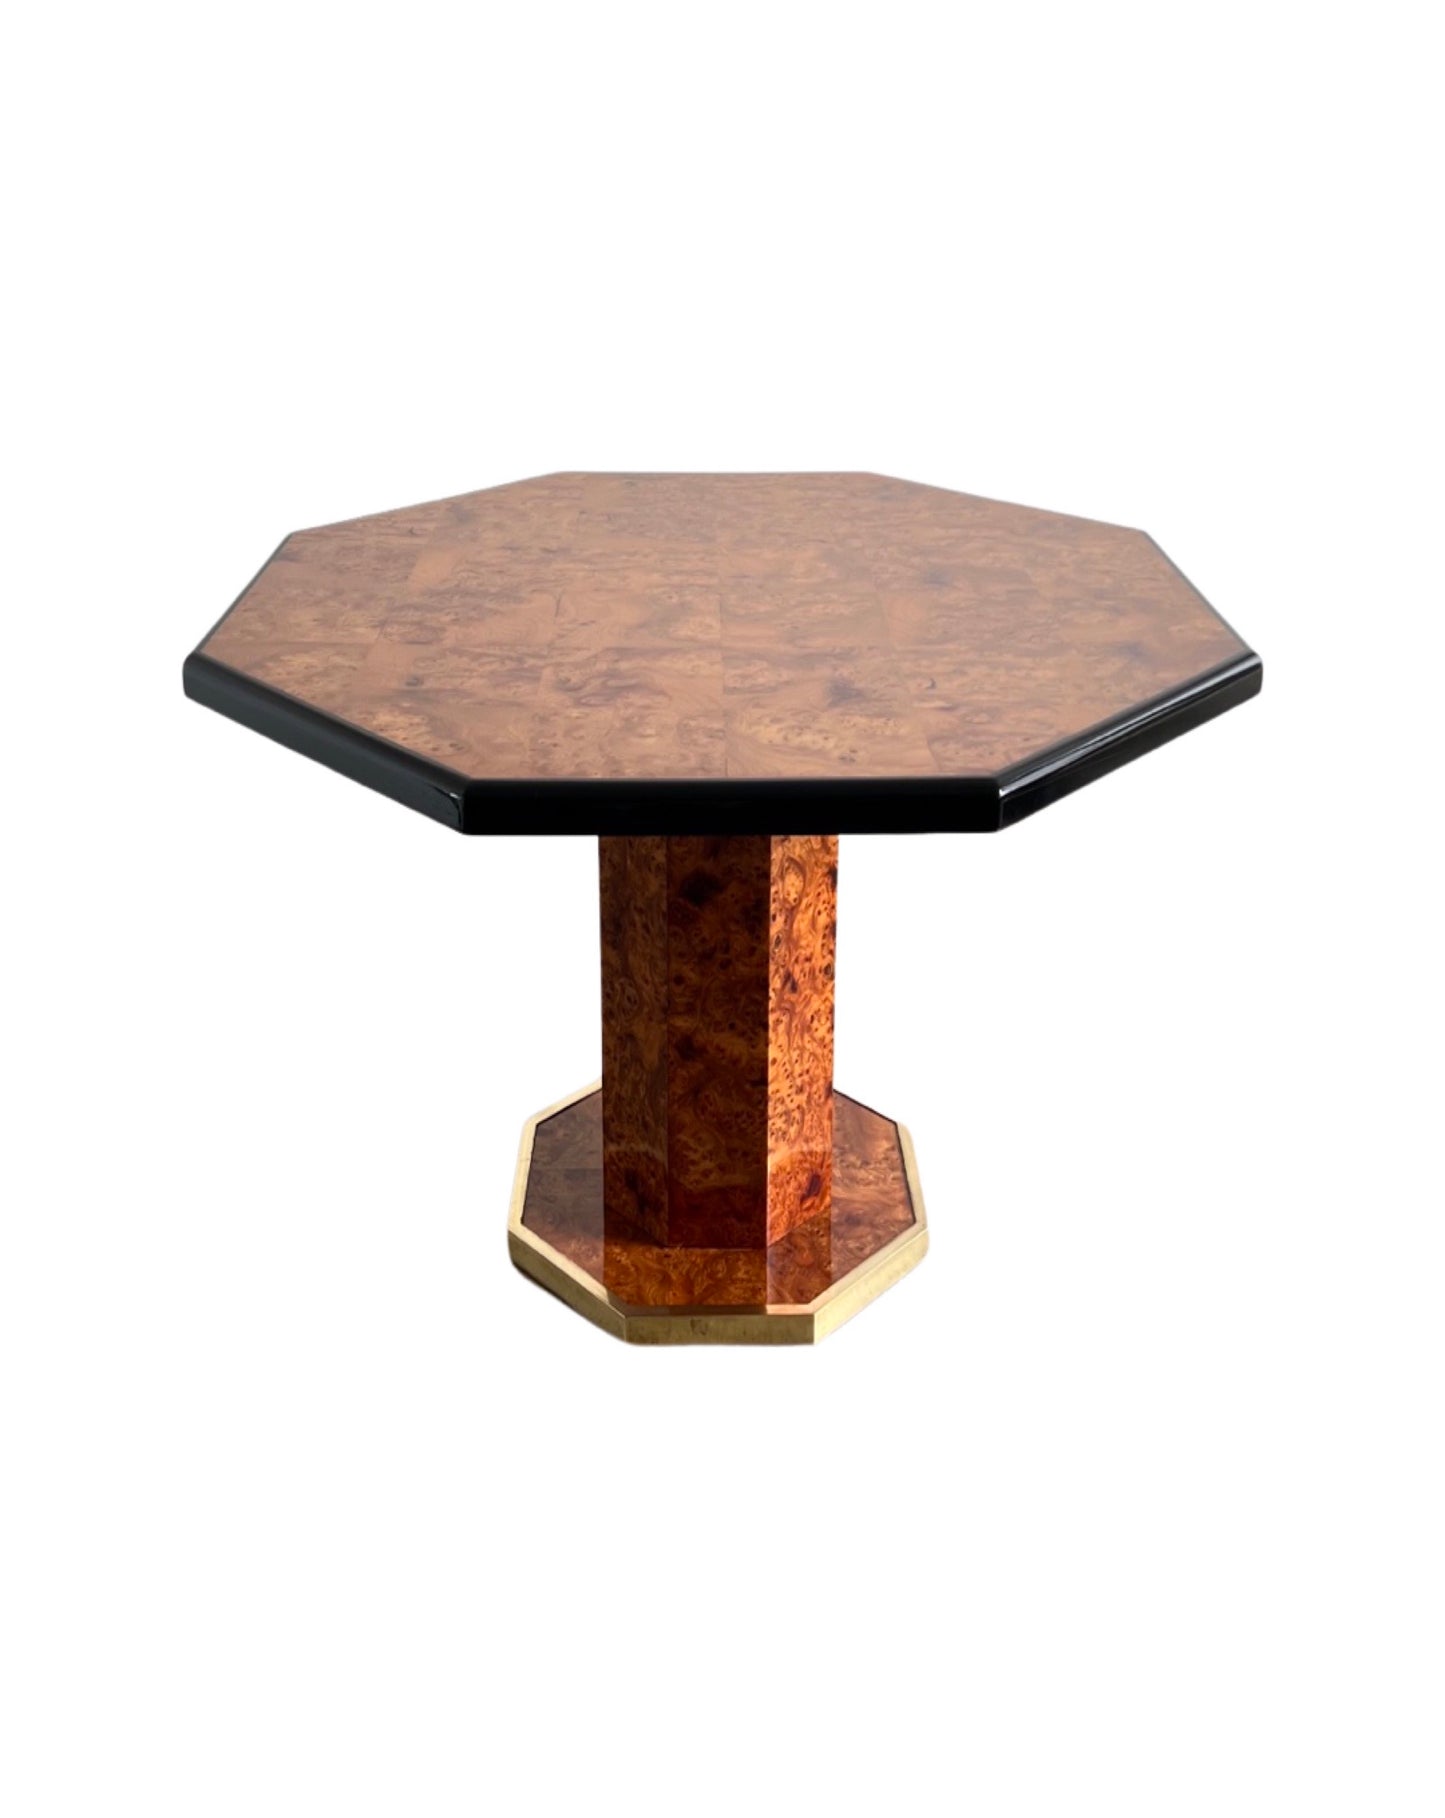 Willy Rizzo for Mario Sabon Pedestal Octagonal Dining Table in Brass and Burlwood, 1970s